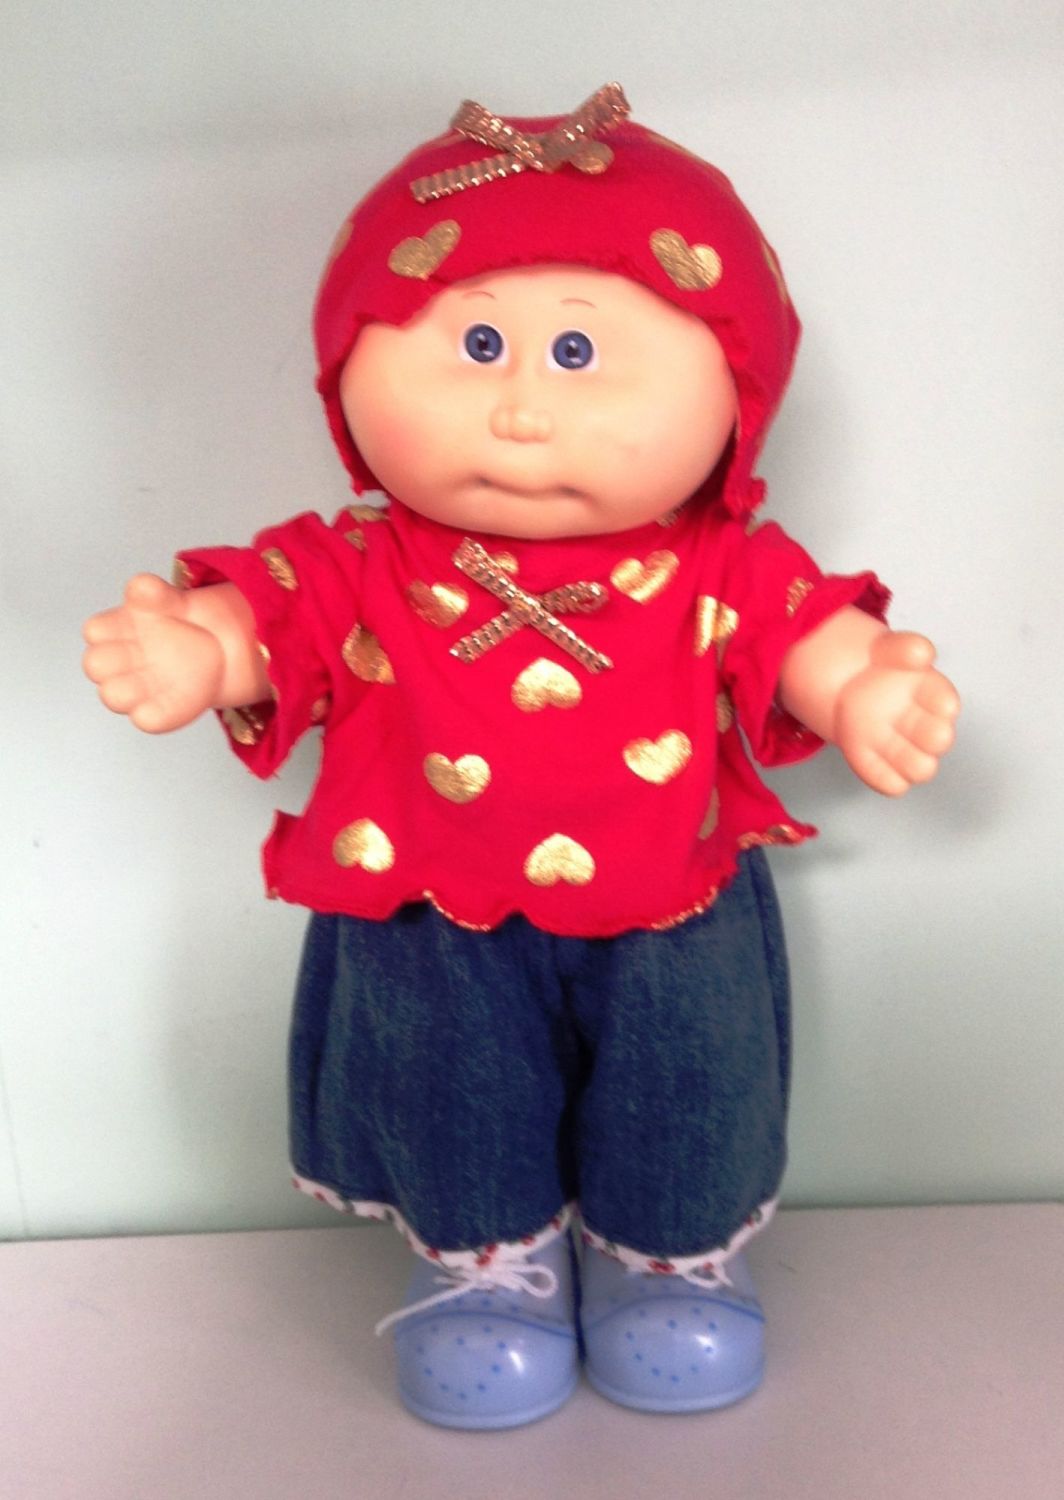 Doll's culottes set made to fit a 14 inch high Cabbage Patch doll